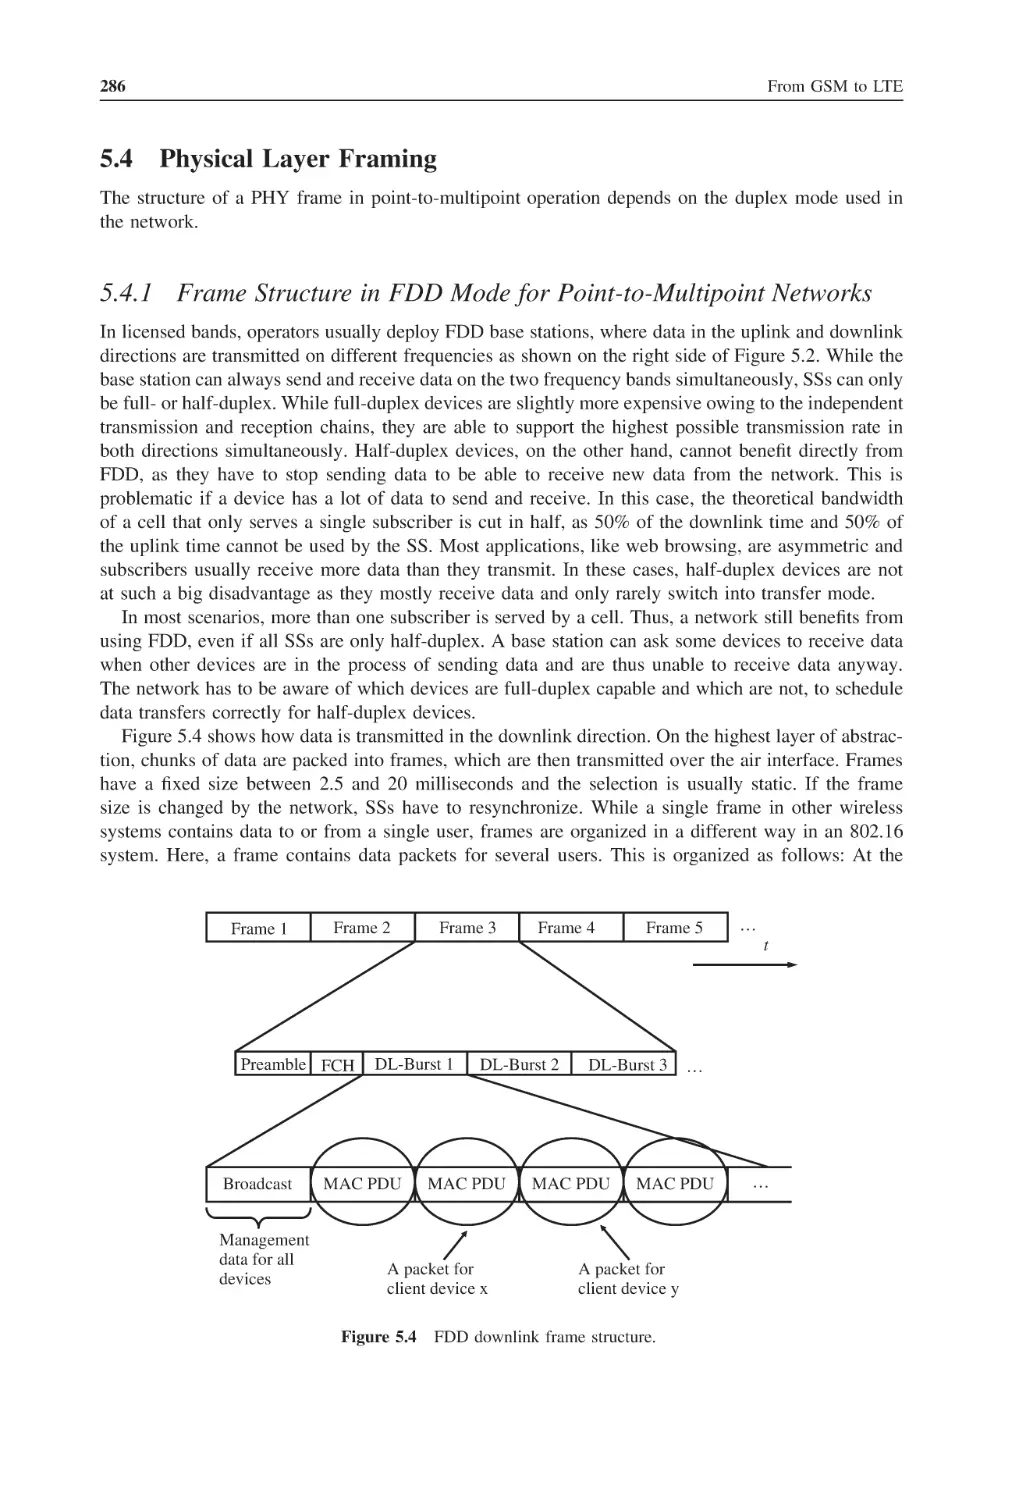 5.4 Physical Layer Framing
5.4.1 Frame Structure in FDD Mode for Point-to-Multipoint Networks